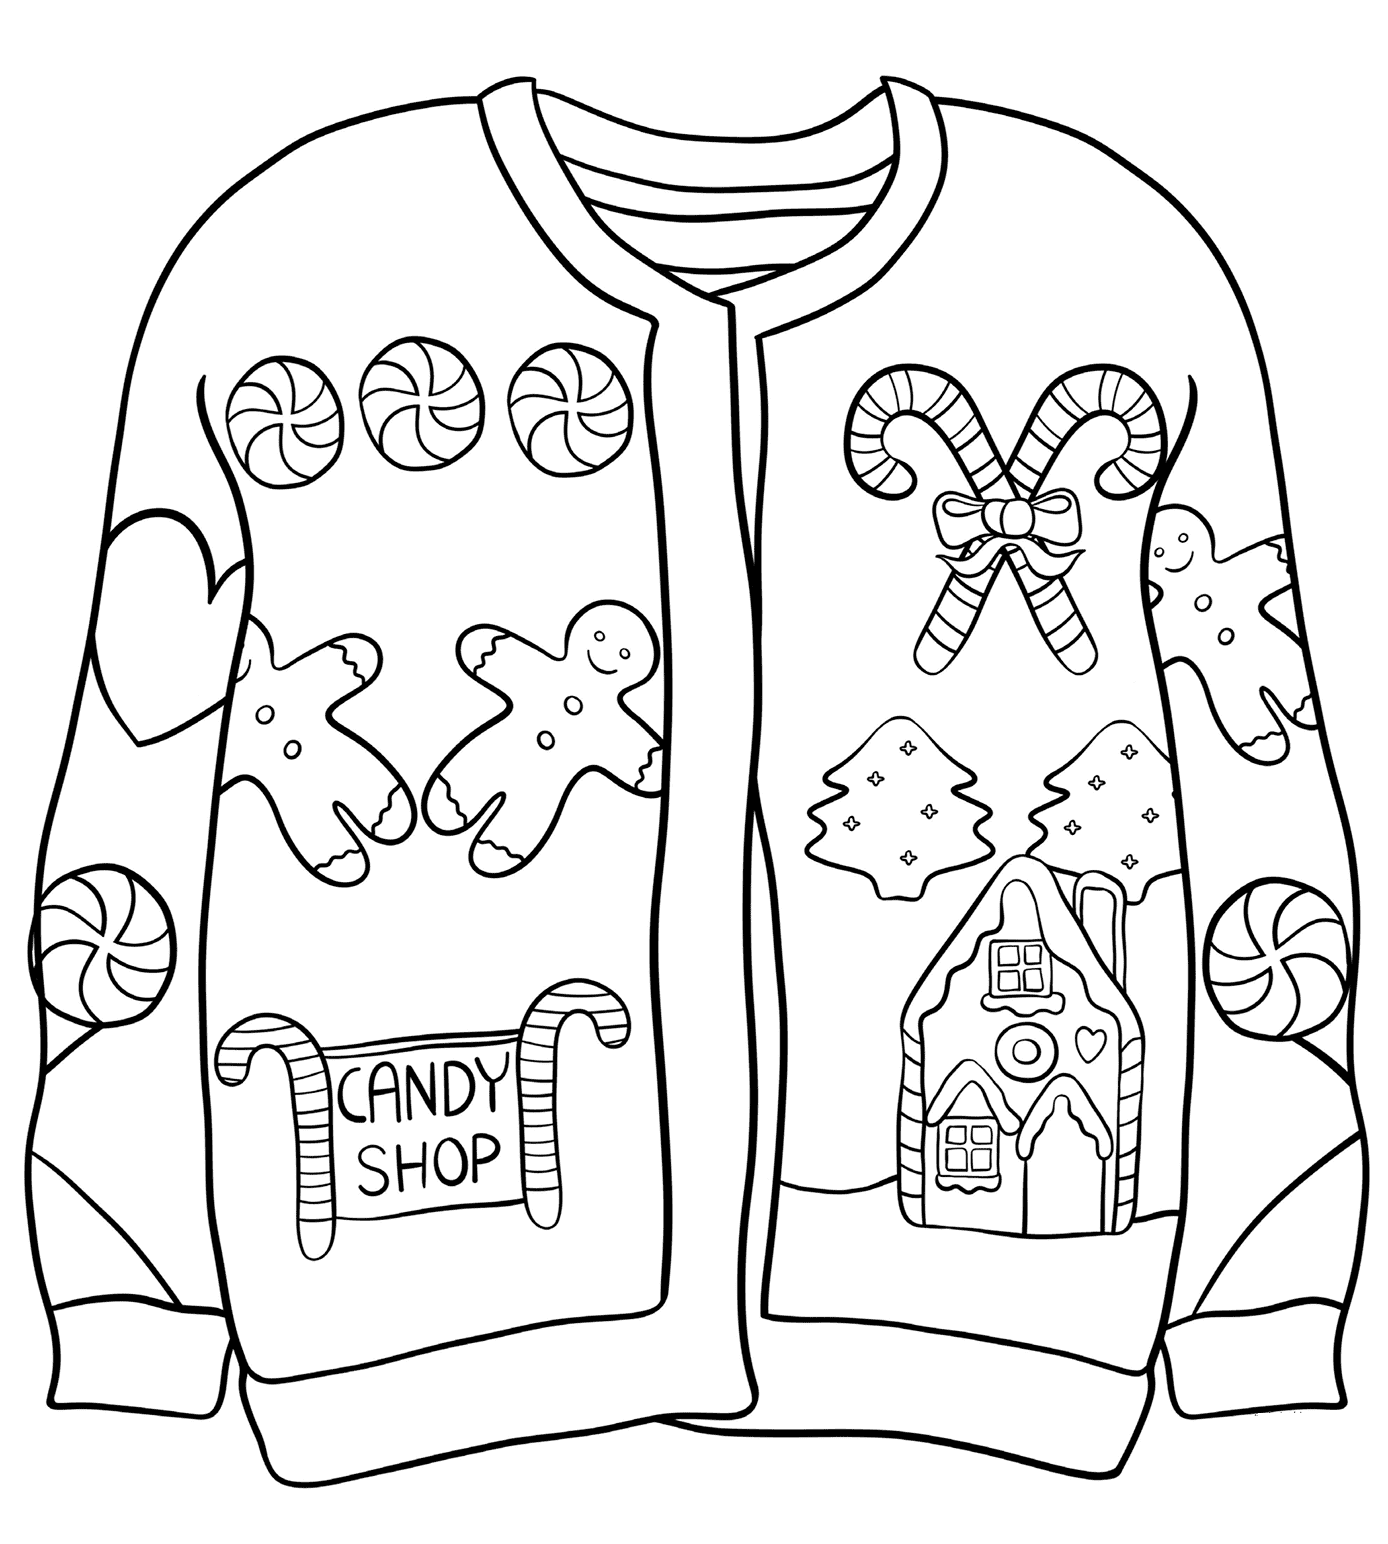 Christmas Sweater With Candy Shop Coloring Pages